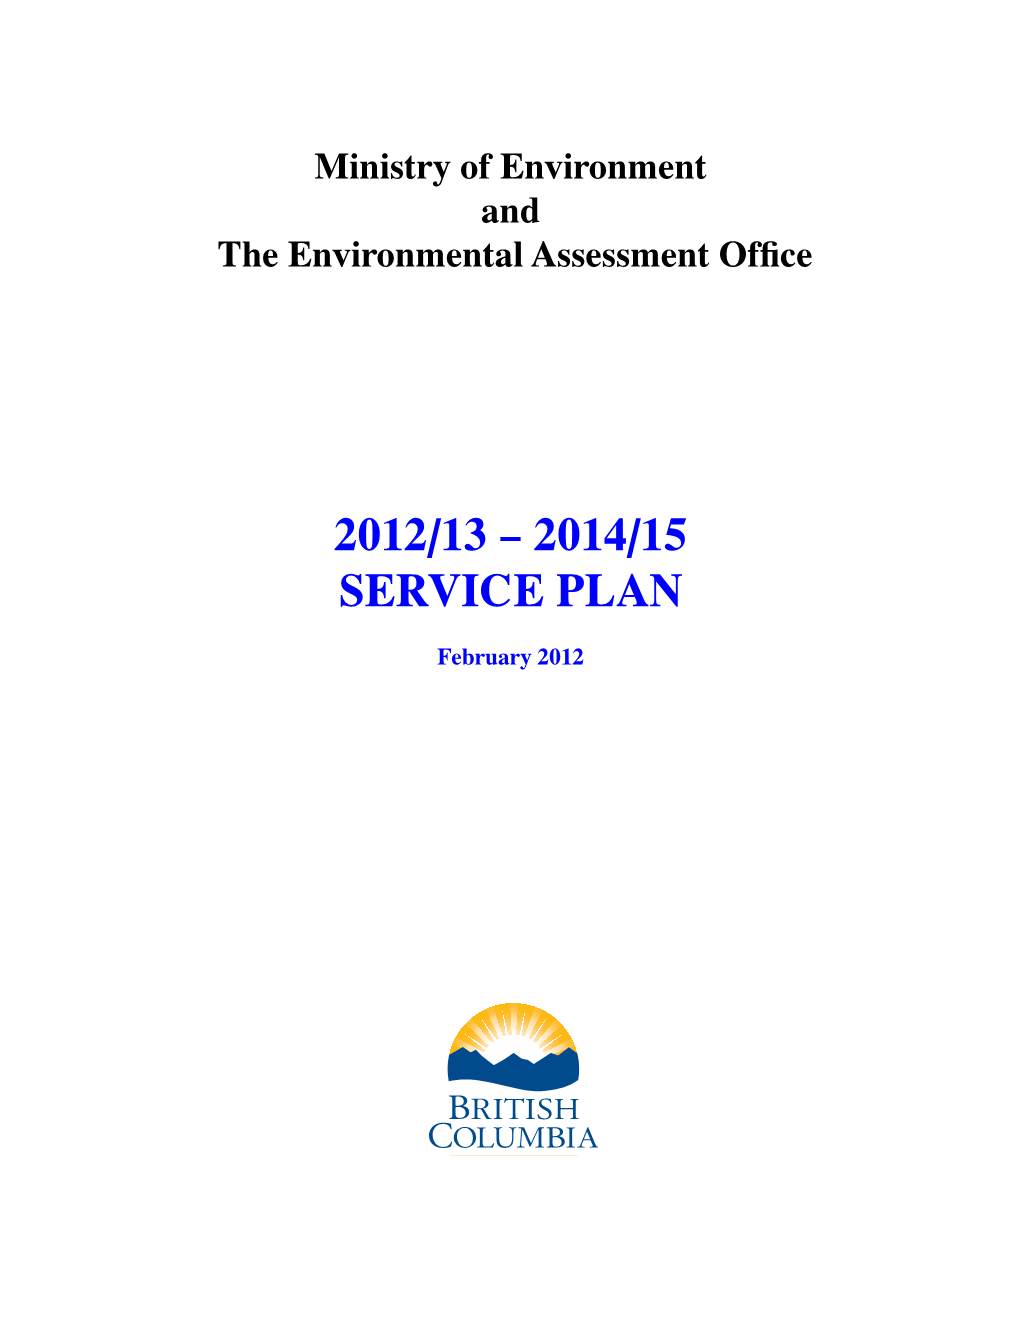 Ministry of Environment and the Environmental Assessment Office